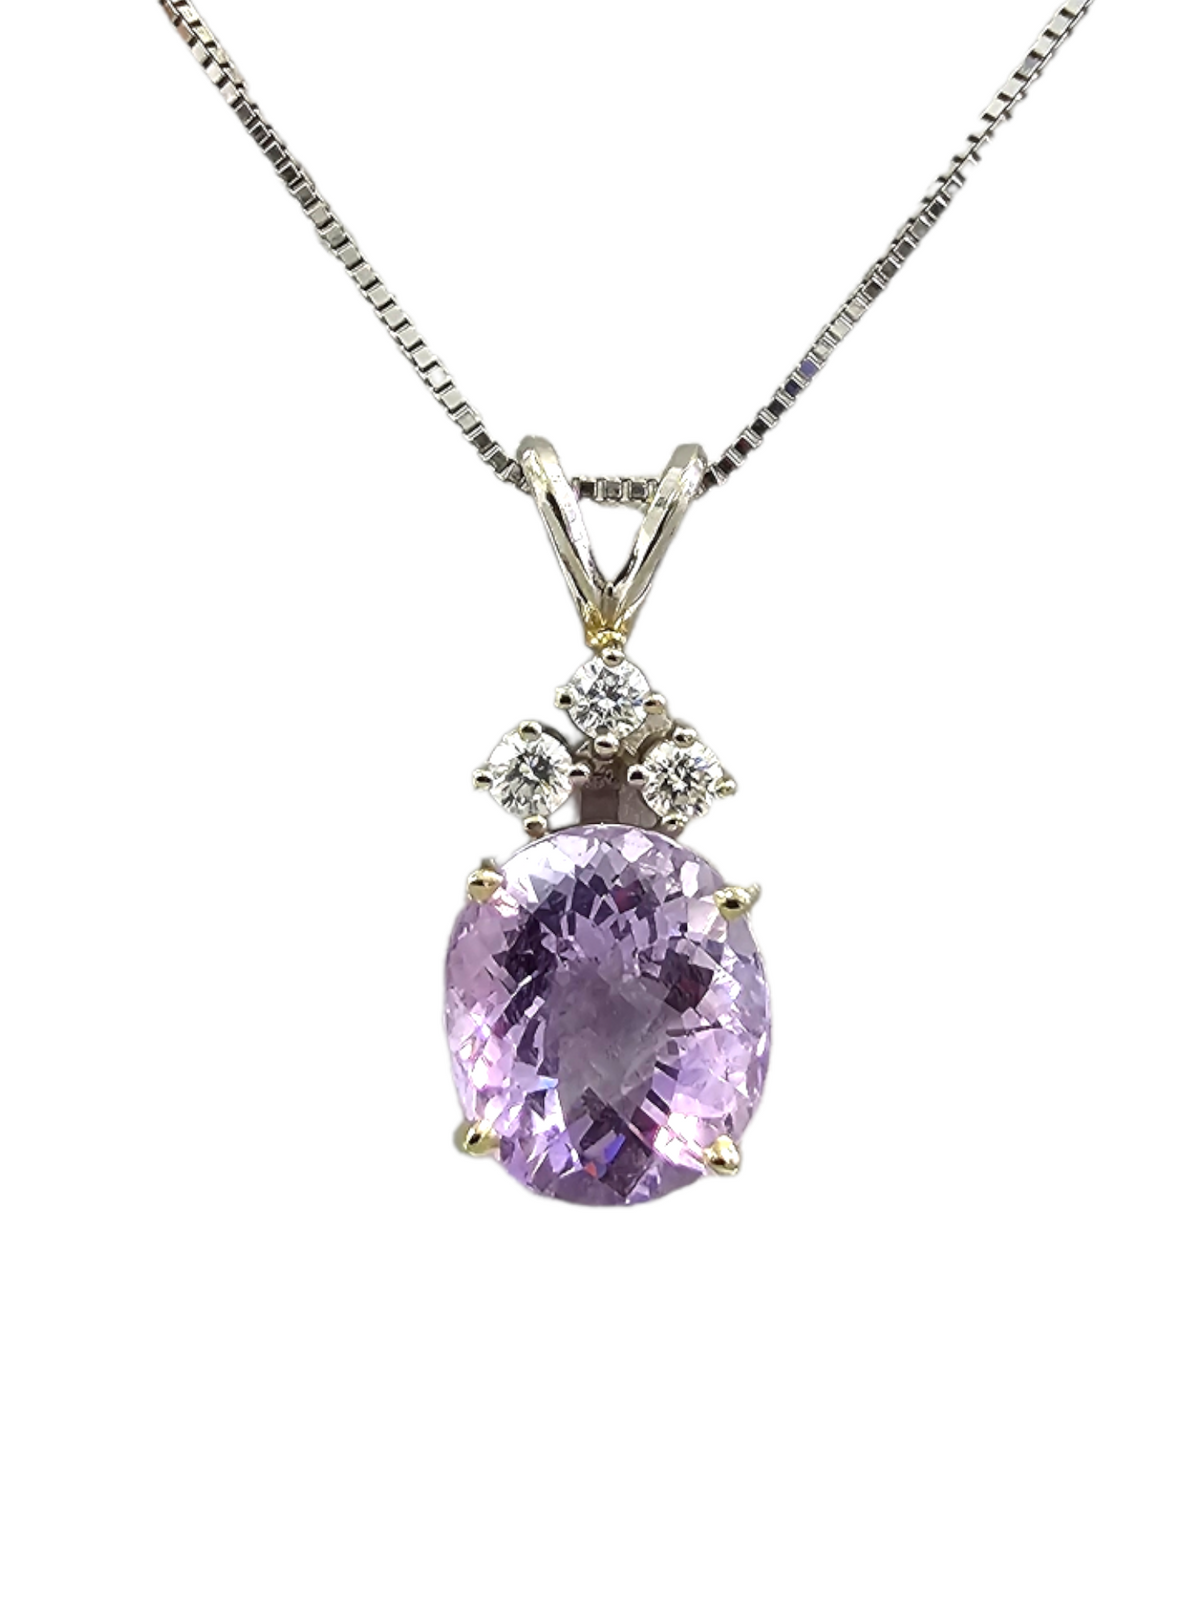 Amethyst and Diamond Pendant Necklace, 14kt White Gold